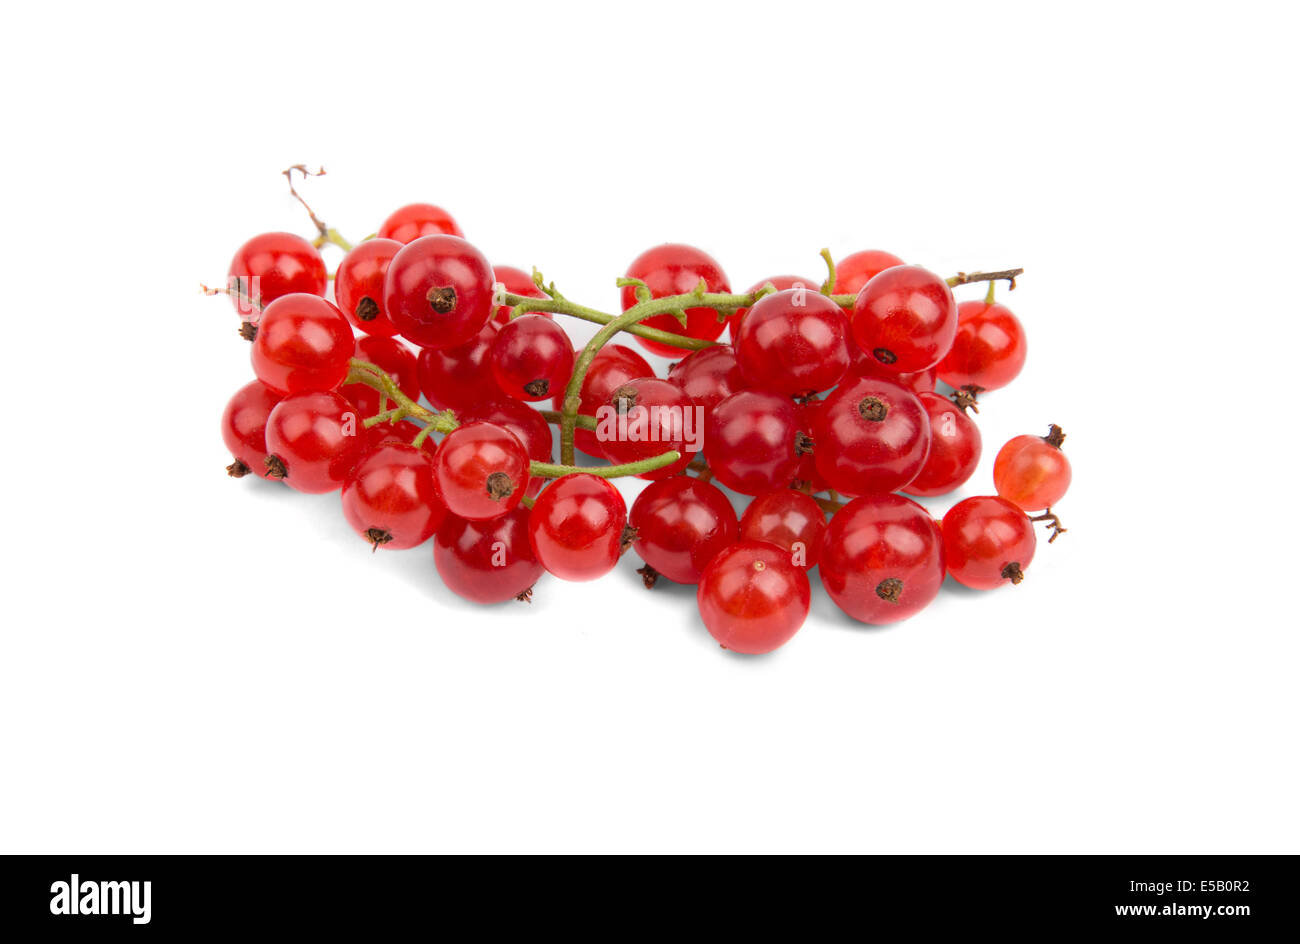 Bunch of red currants on a white background Stock Photo